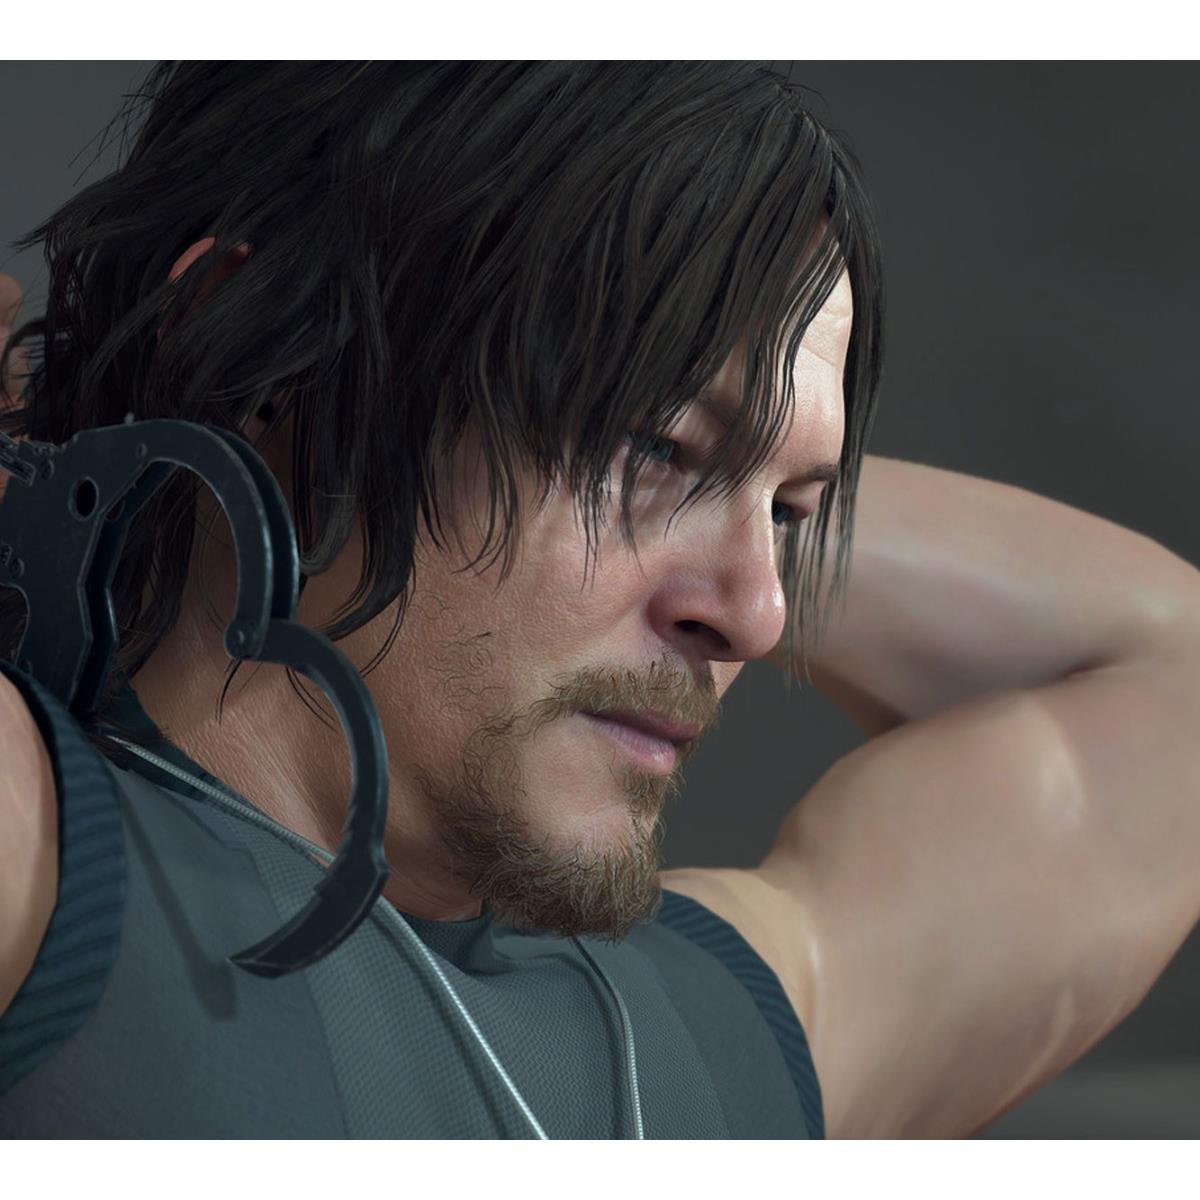 Death Stranding is free to claim on the Epic Games Store today [UPDATE] -  Neowin